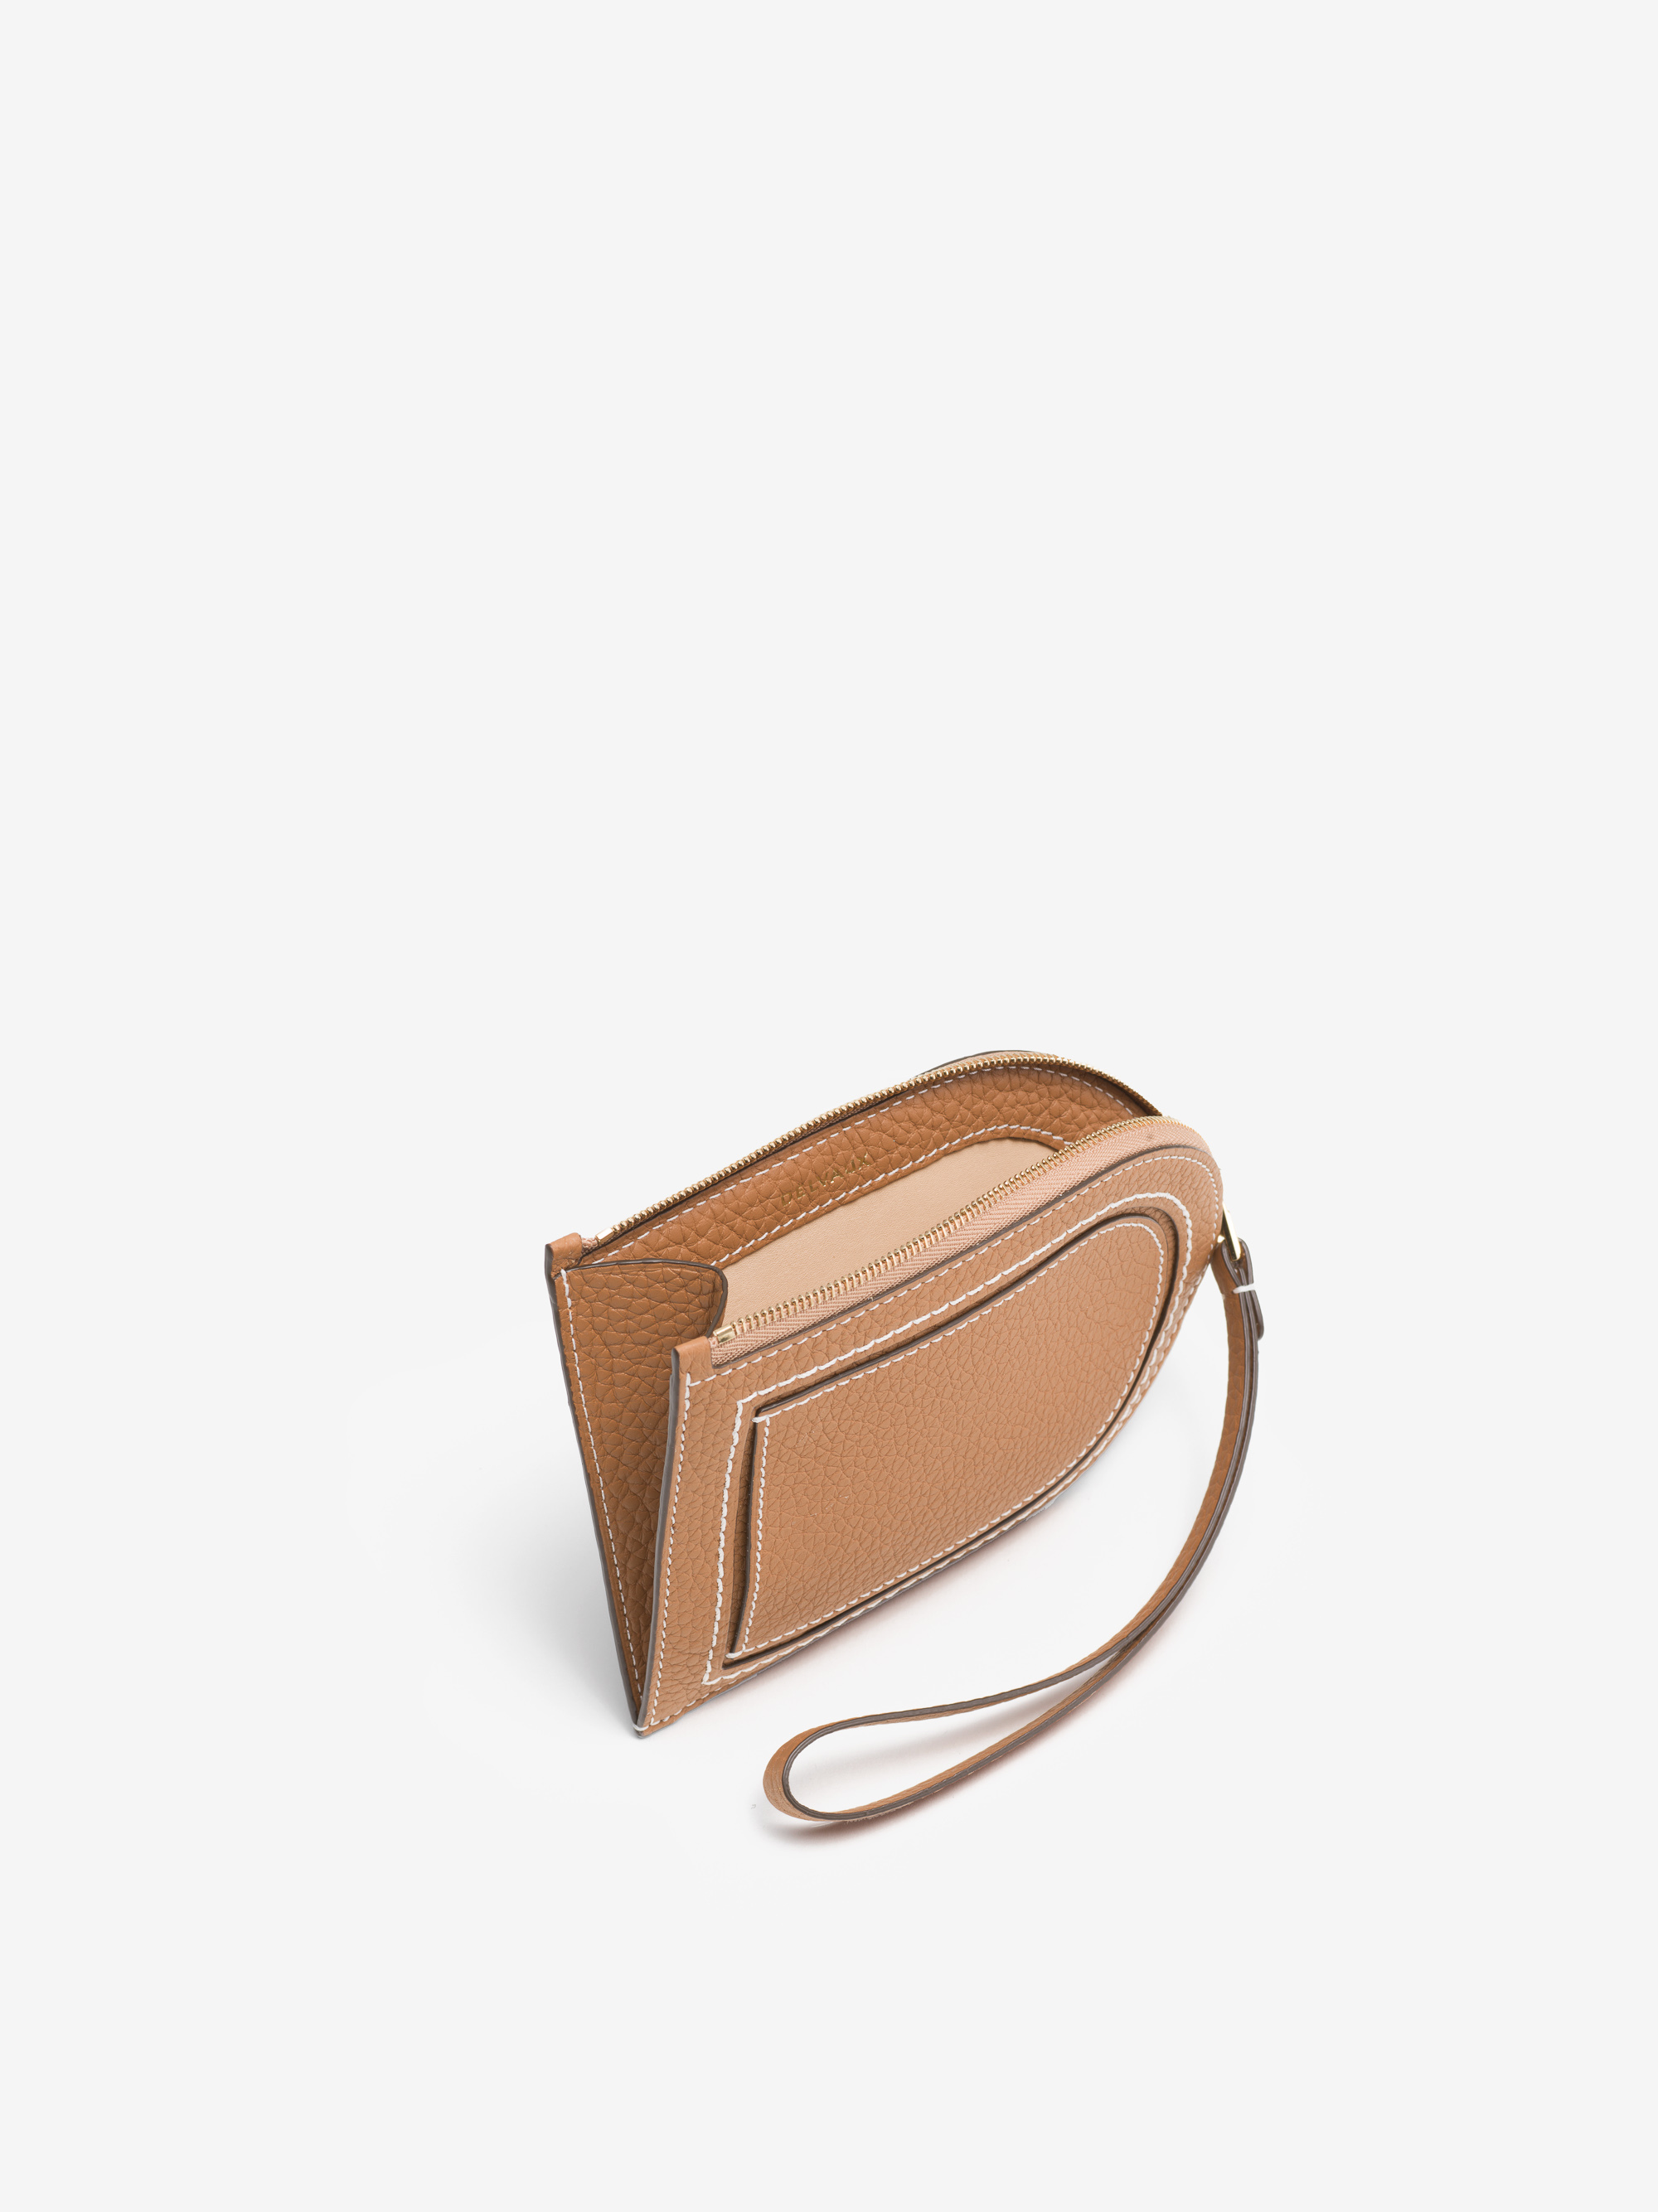 Small leather goods | Delvaux